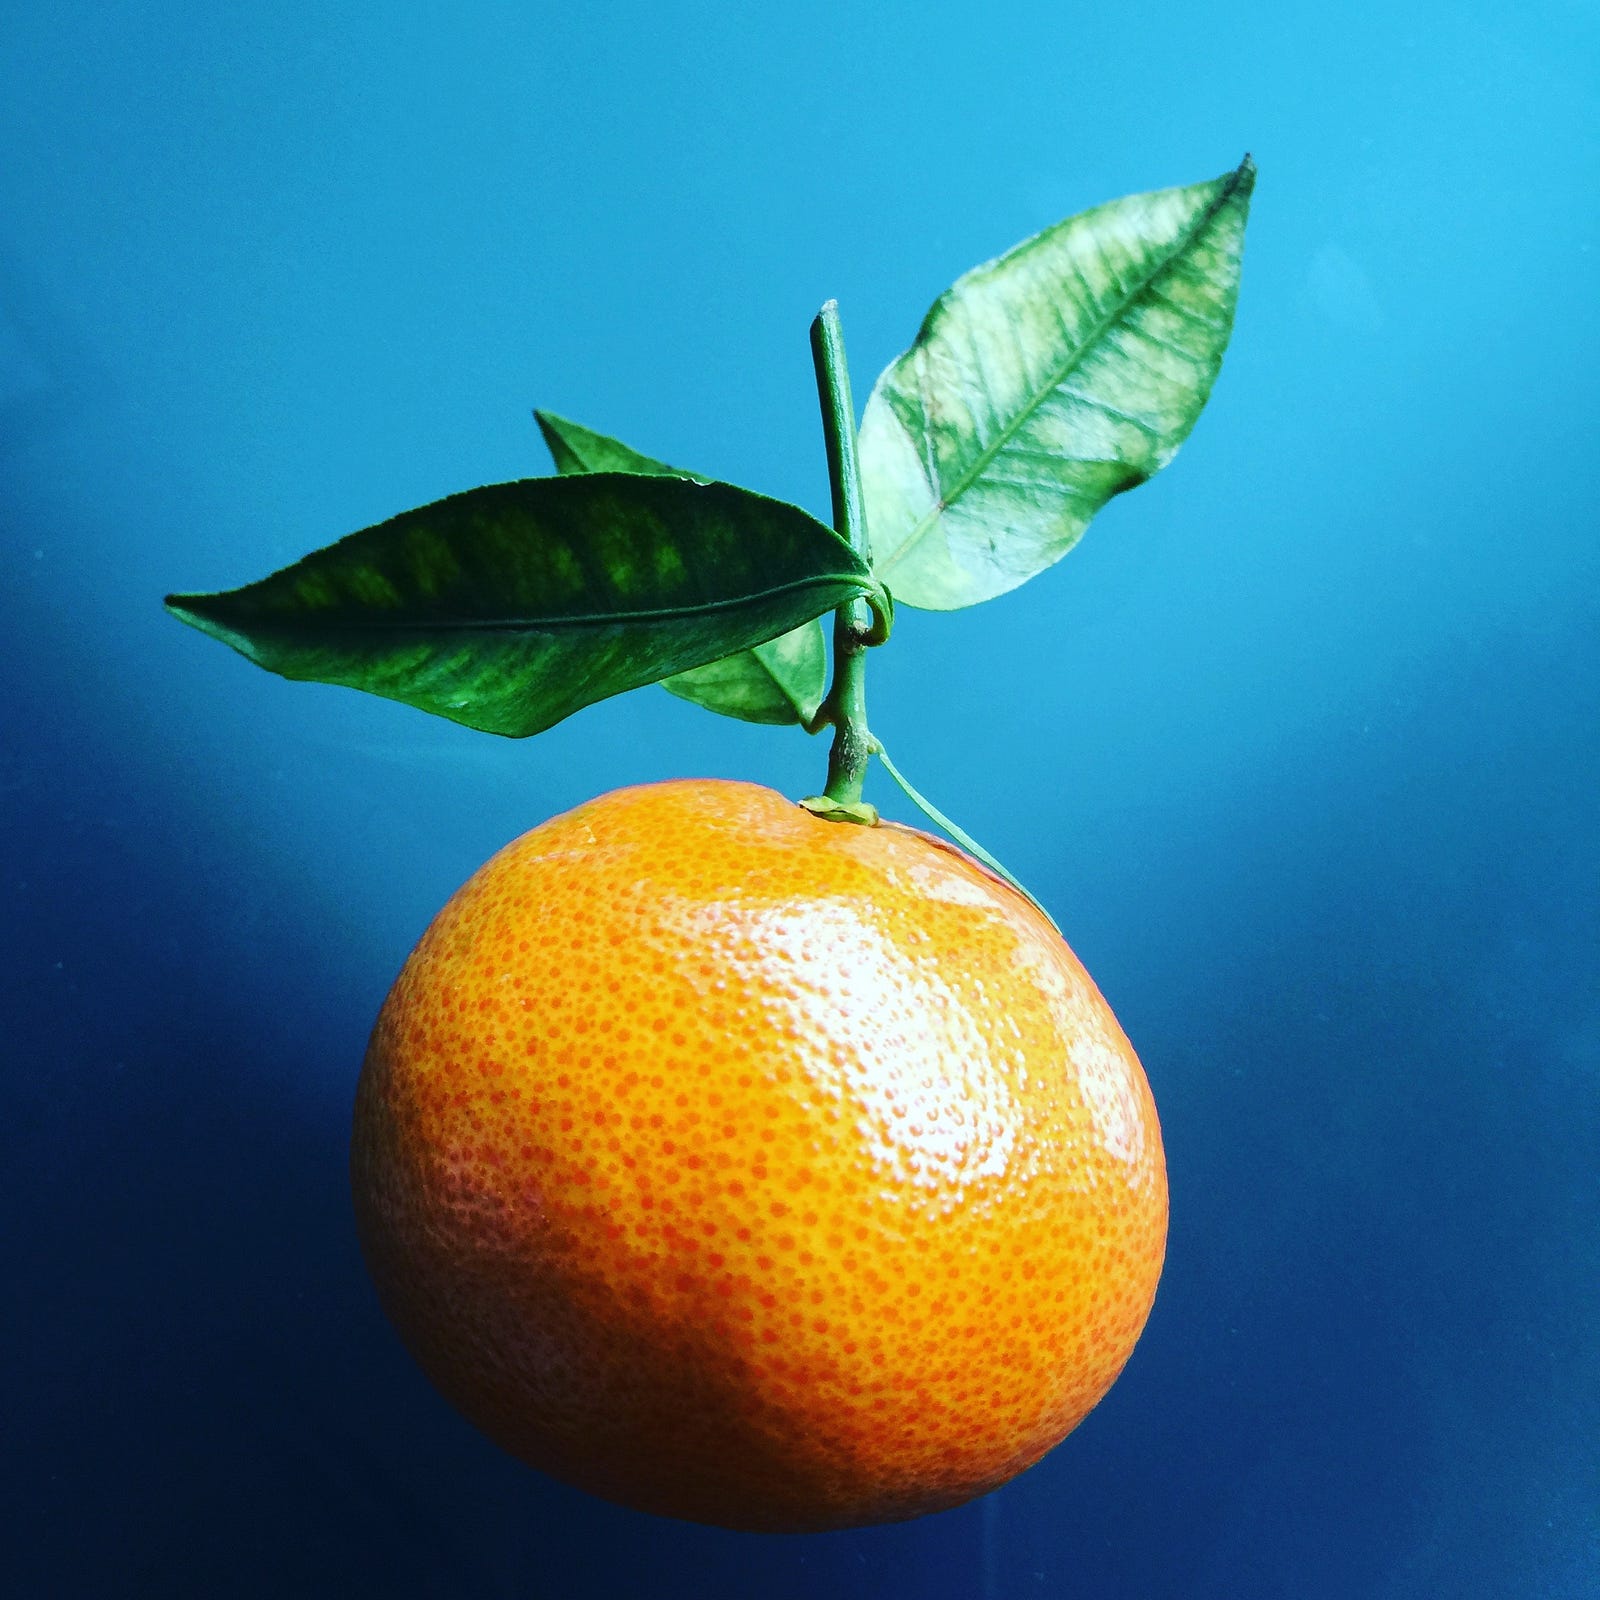 A single tangerine and its stem, set against a medium to dark blue background. Mandarins are the second largest cultivated group of citrus after sweet oranges. The former provides about 25 percent of world citrus production.